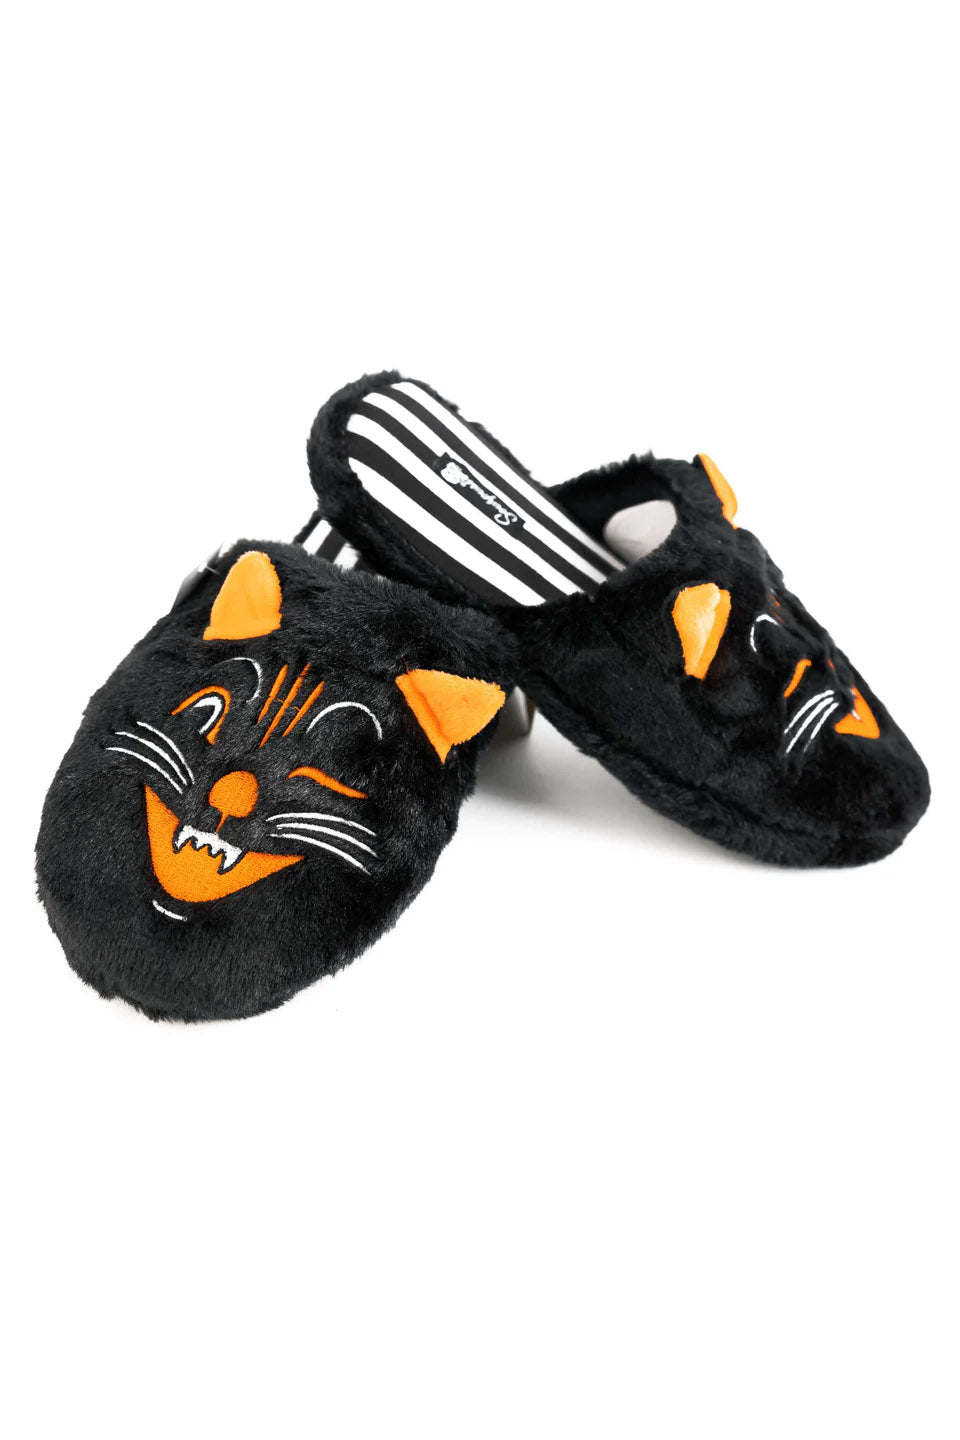 Furry Jinx the Cat Slippers